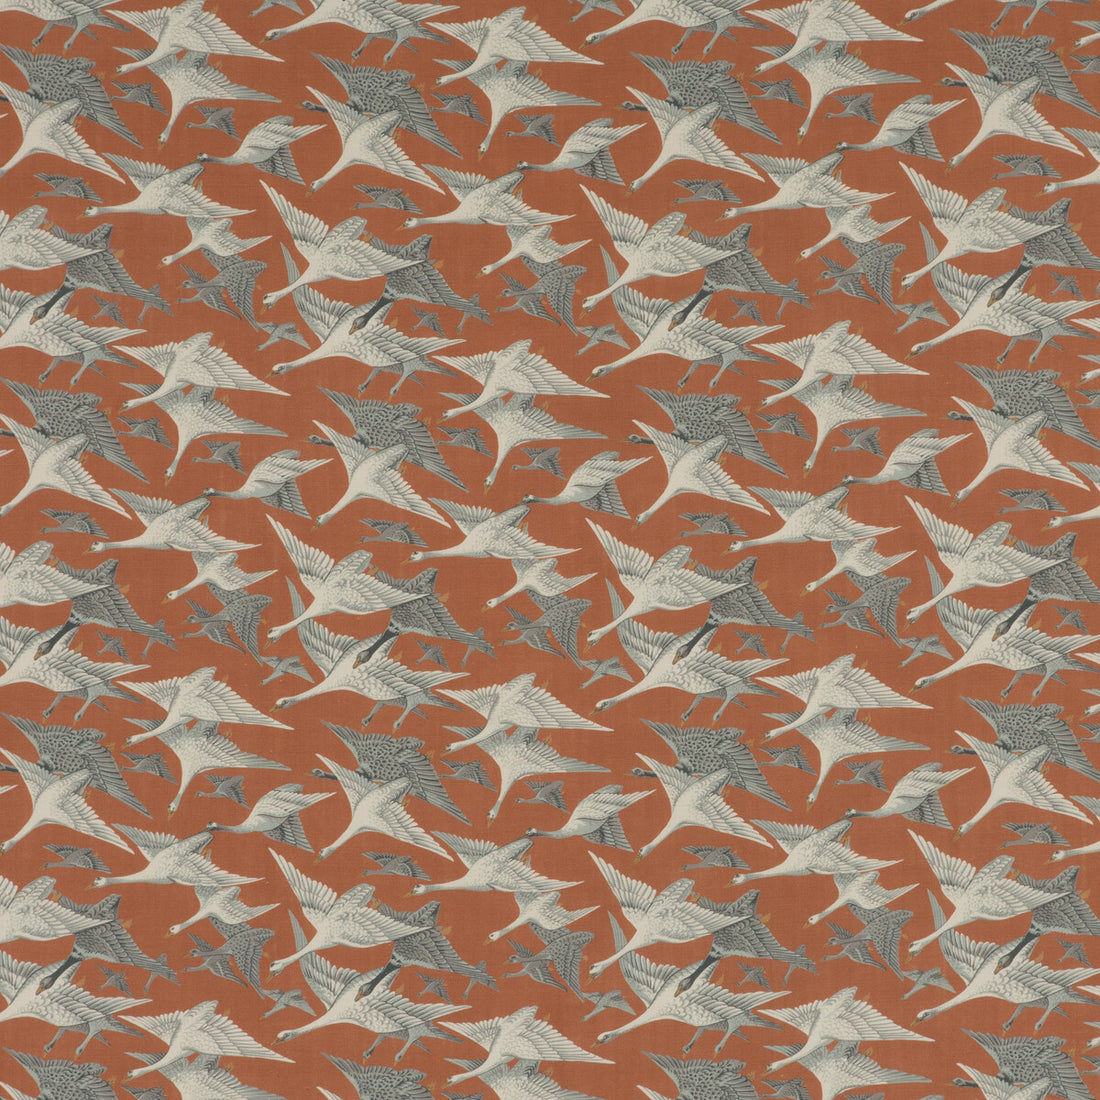 Wild Geese Linen fabric in spice color - pattern FD287.T30.0 - by Mulberry in the Bohemian Travels collection